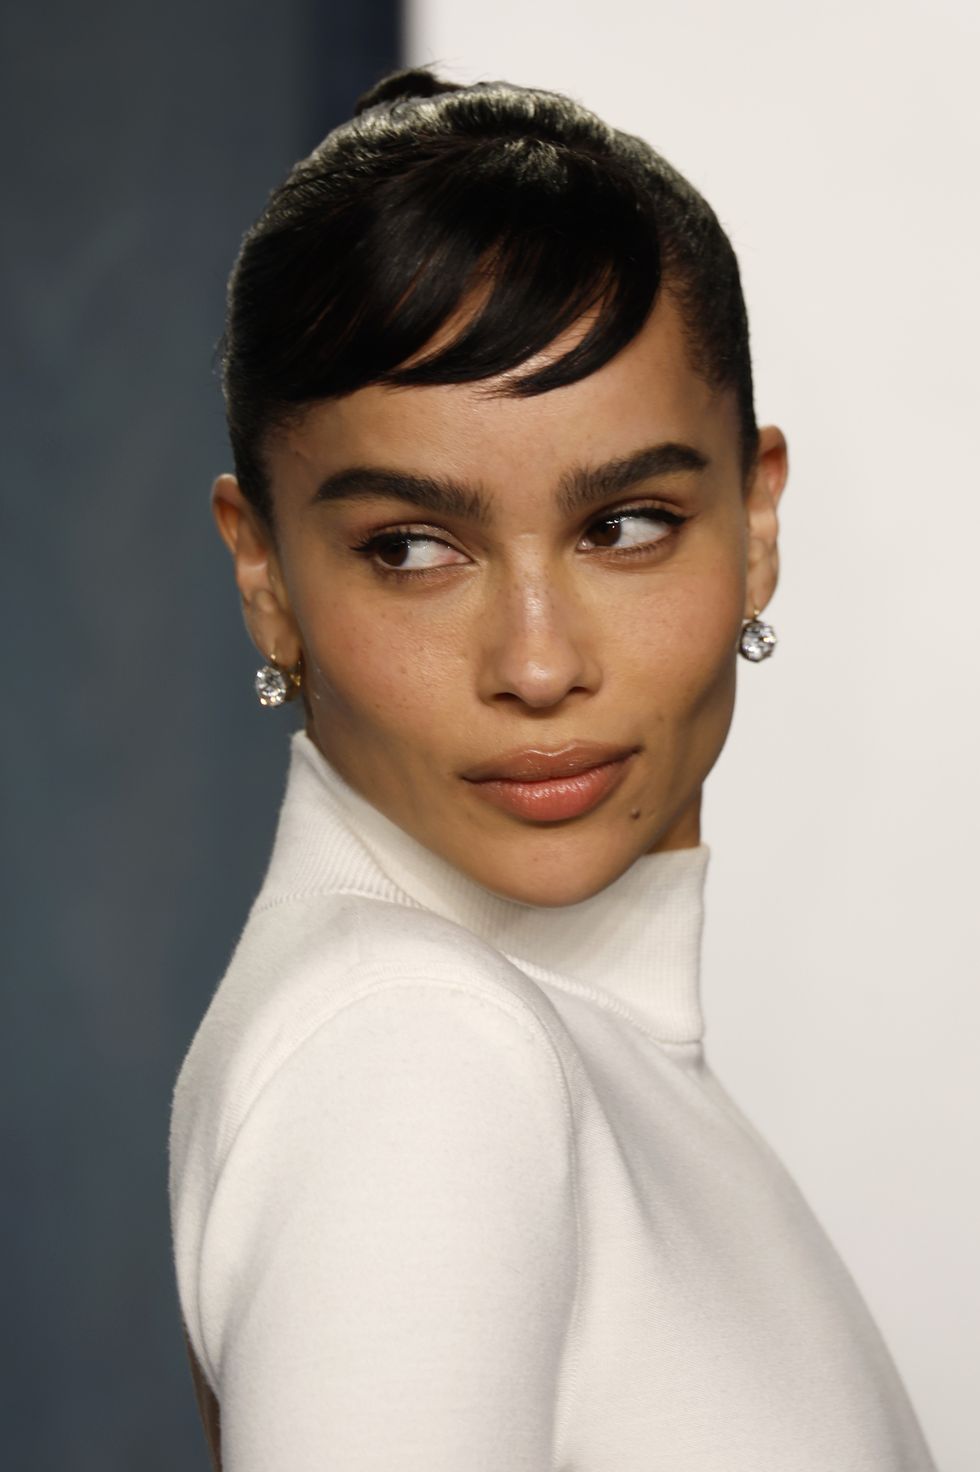 beverly hills, california march 27 zoë kravitz attends the 2022 vanity fair oscar party hosted by radhika jones at wallis annenberg center for the performing arts on march 27, 2022 in beverly hills, california